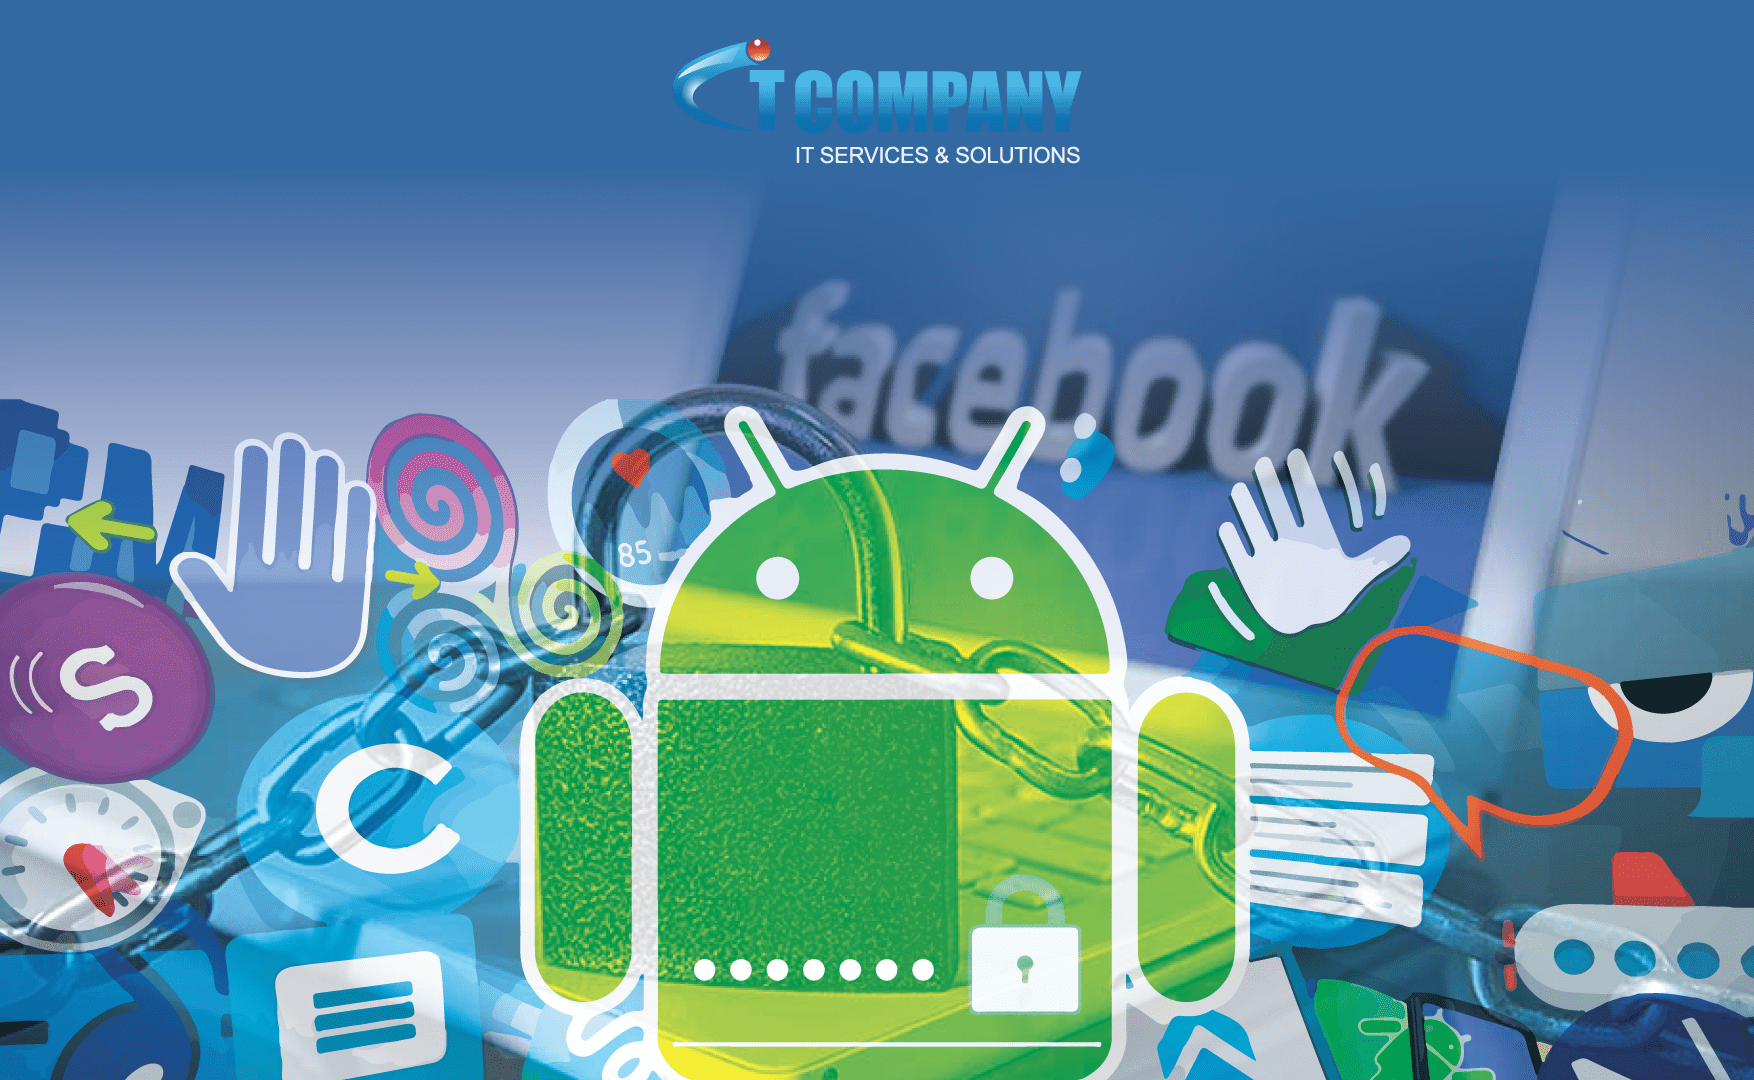 Popular Android applications that collected Facebook credentials have been removed by Google